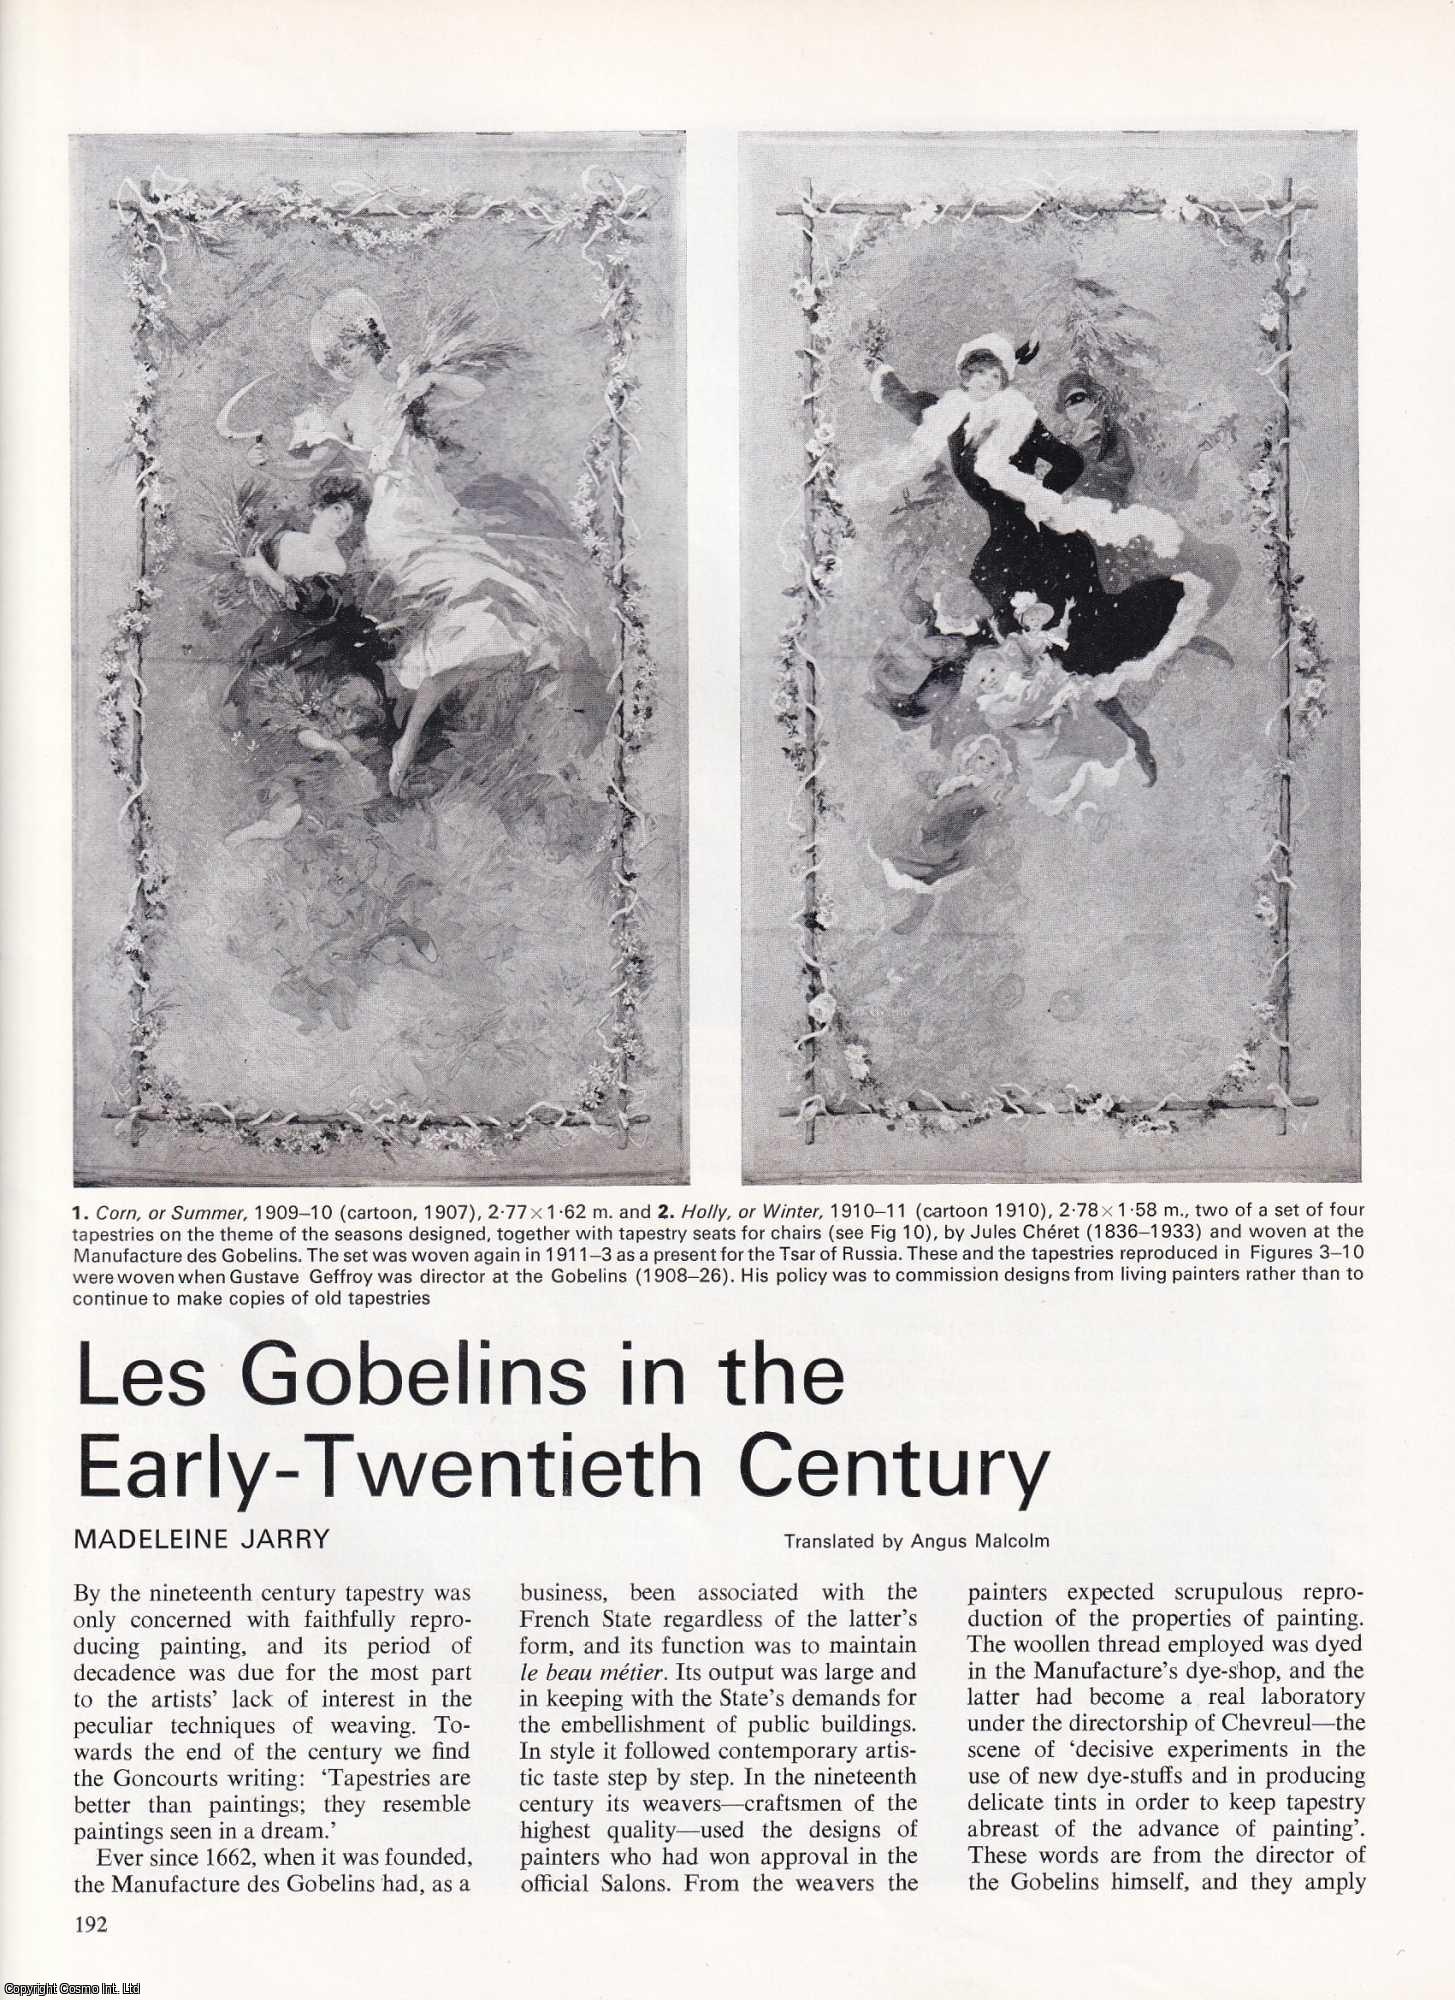 Madeleine Jarry - Les Gobelins in the Early 20th Century. An uncommon original article from Apollo, the Magazine of the Arts, 1967.